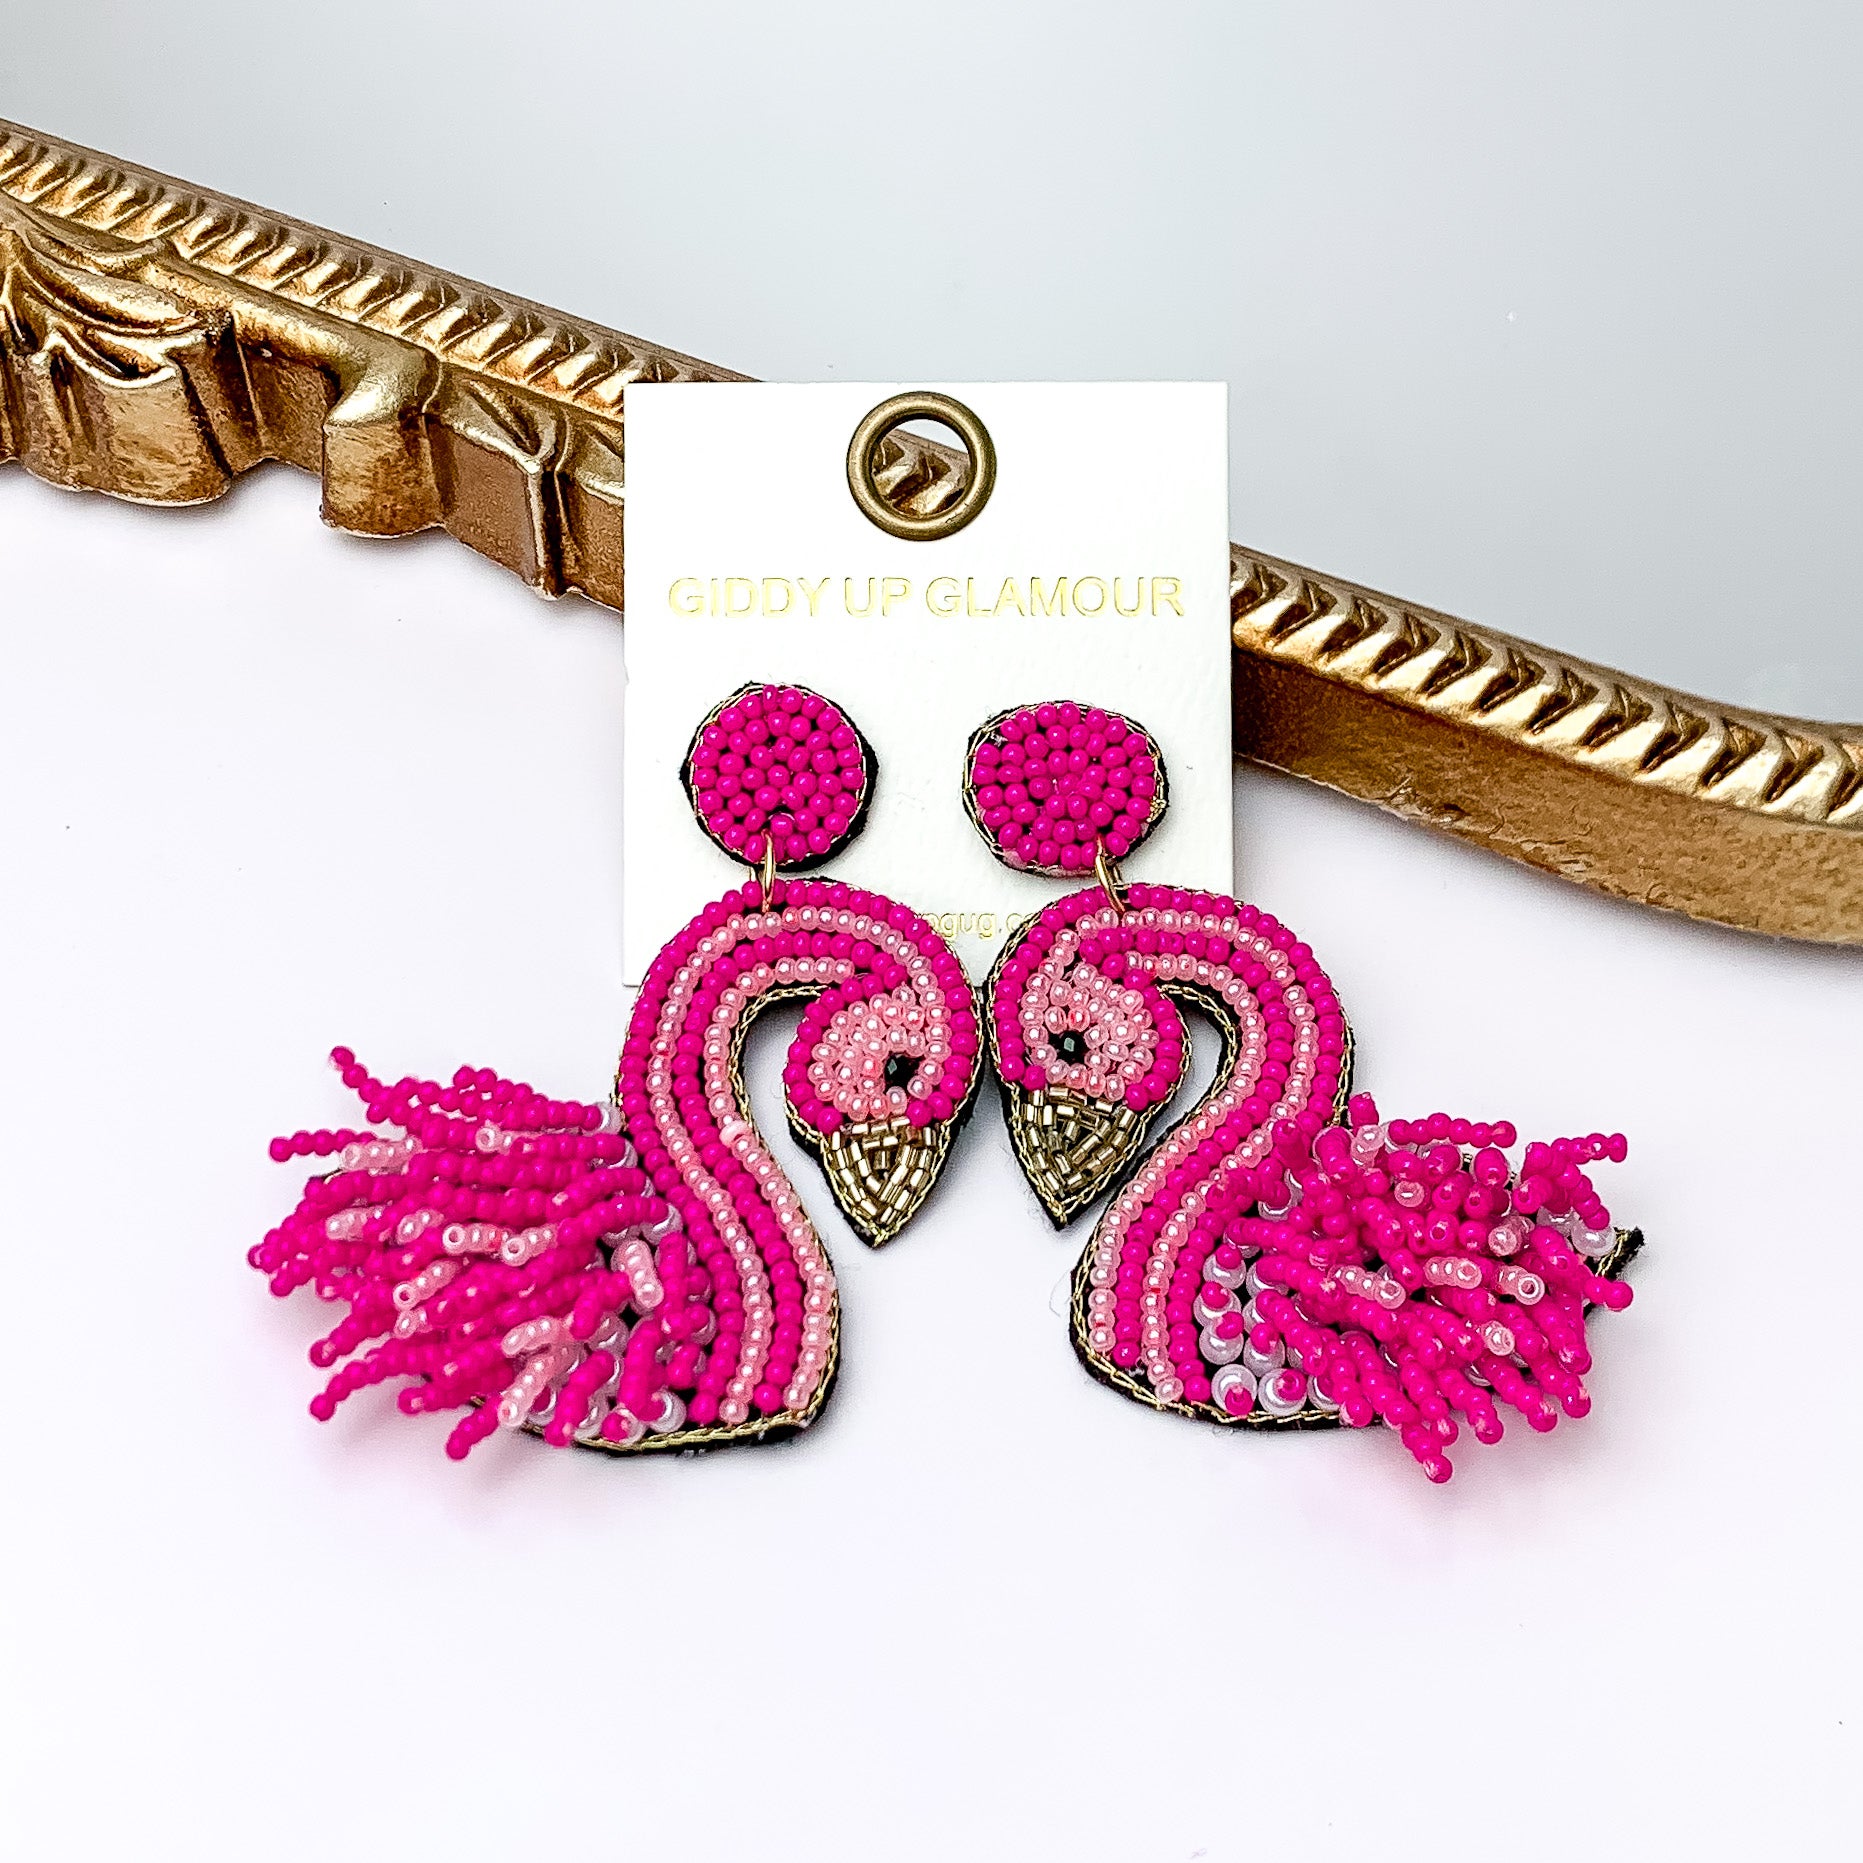 These earrings include circle studs with fuchsia beads and a gold outline. On the flamingo shaped beaded pendant there is beaded fringe detailing. These earrings are pictured leaning against a gold mirror on a white background.